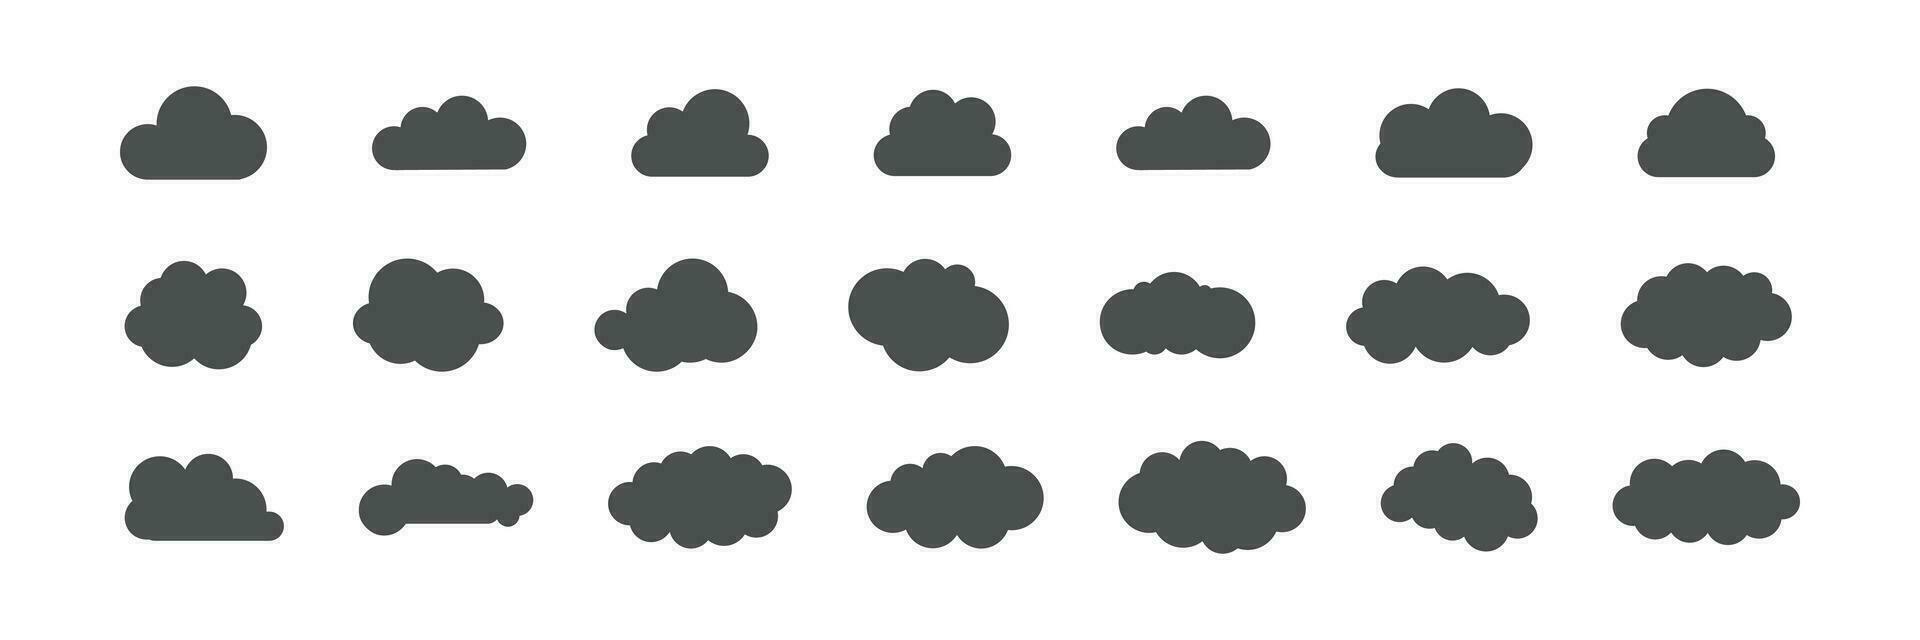 Set of cloud icons in trendy flat style isolated on white background. vector